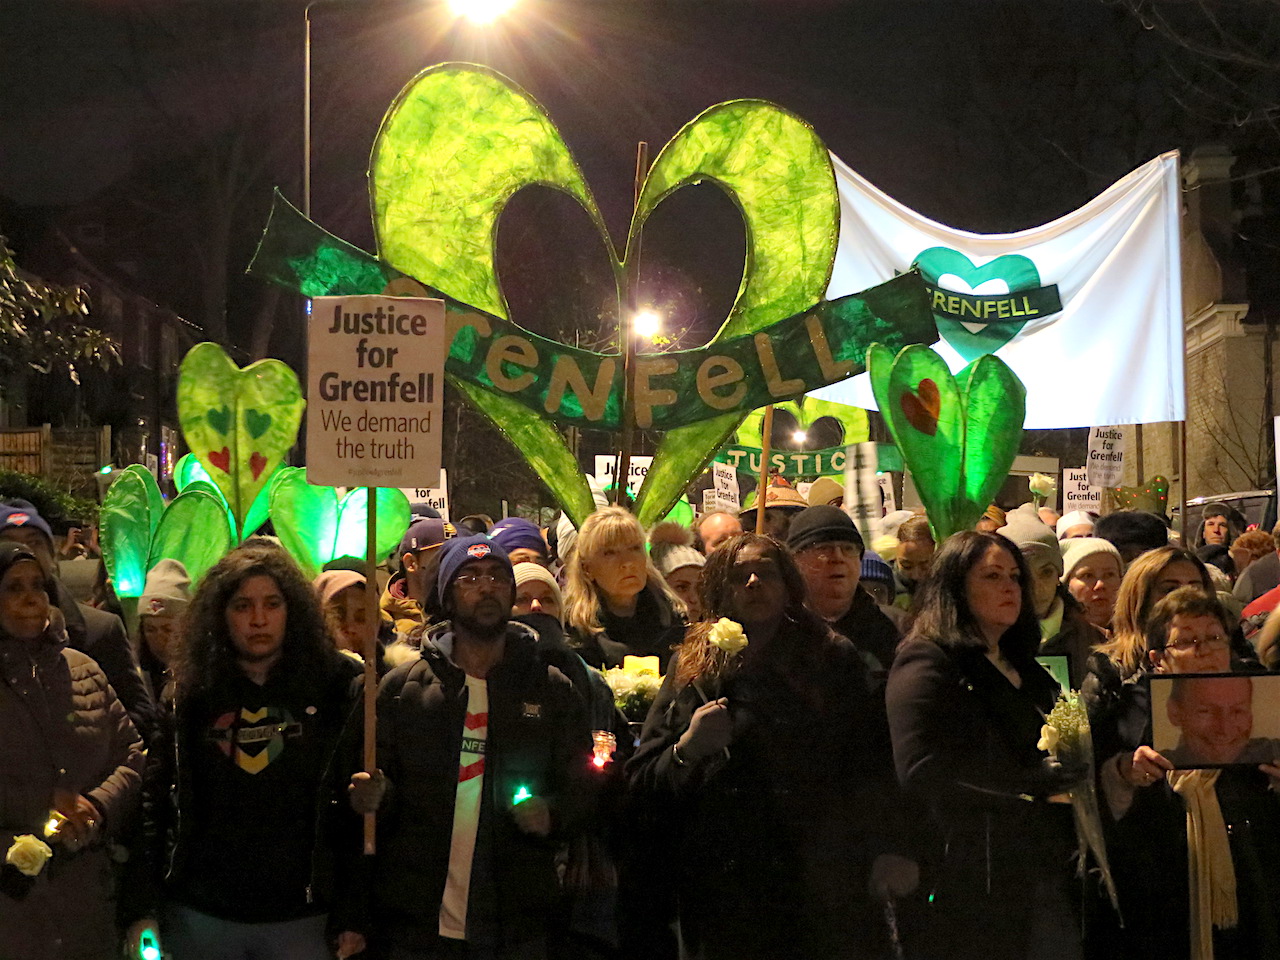 The Silent Walk for Grenfell, December 14, 2017 (Photo: Andy Worthington).